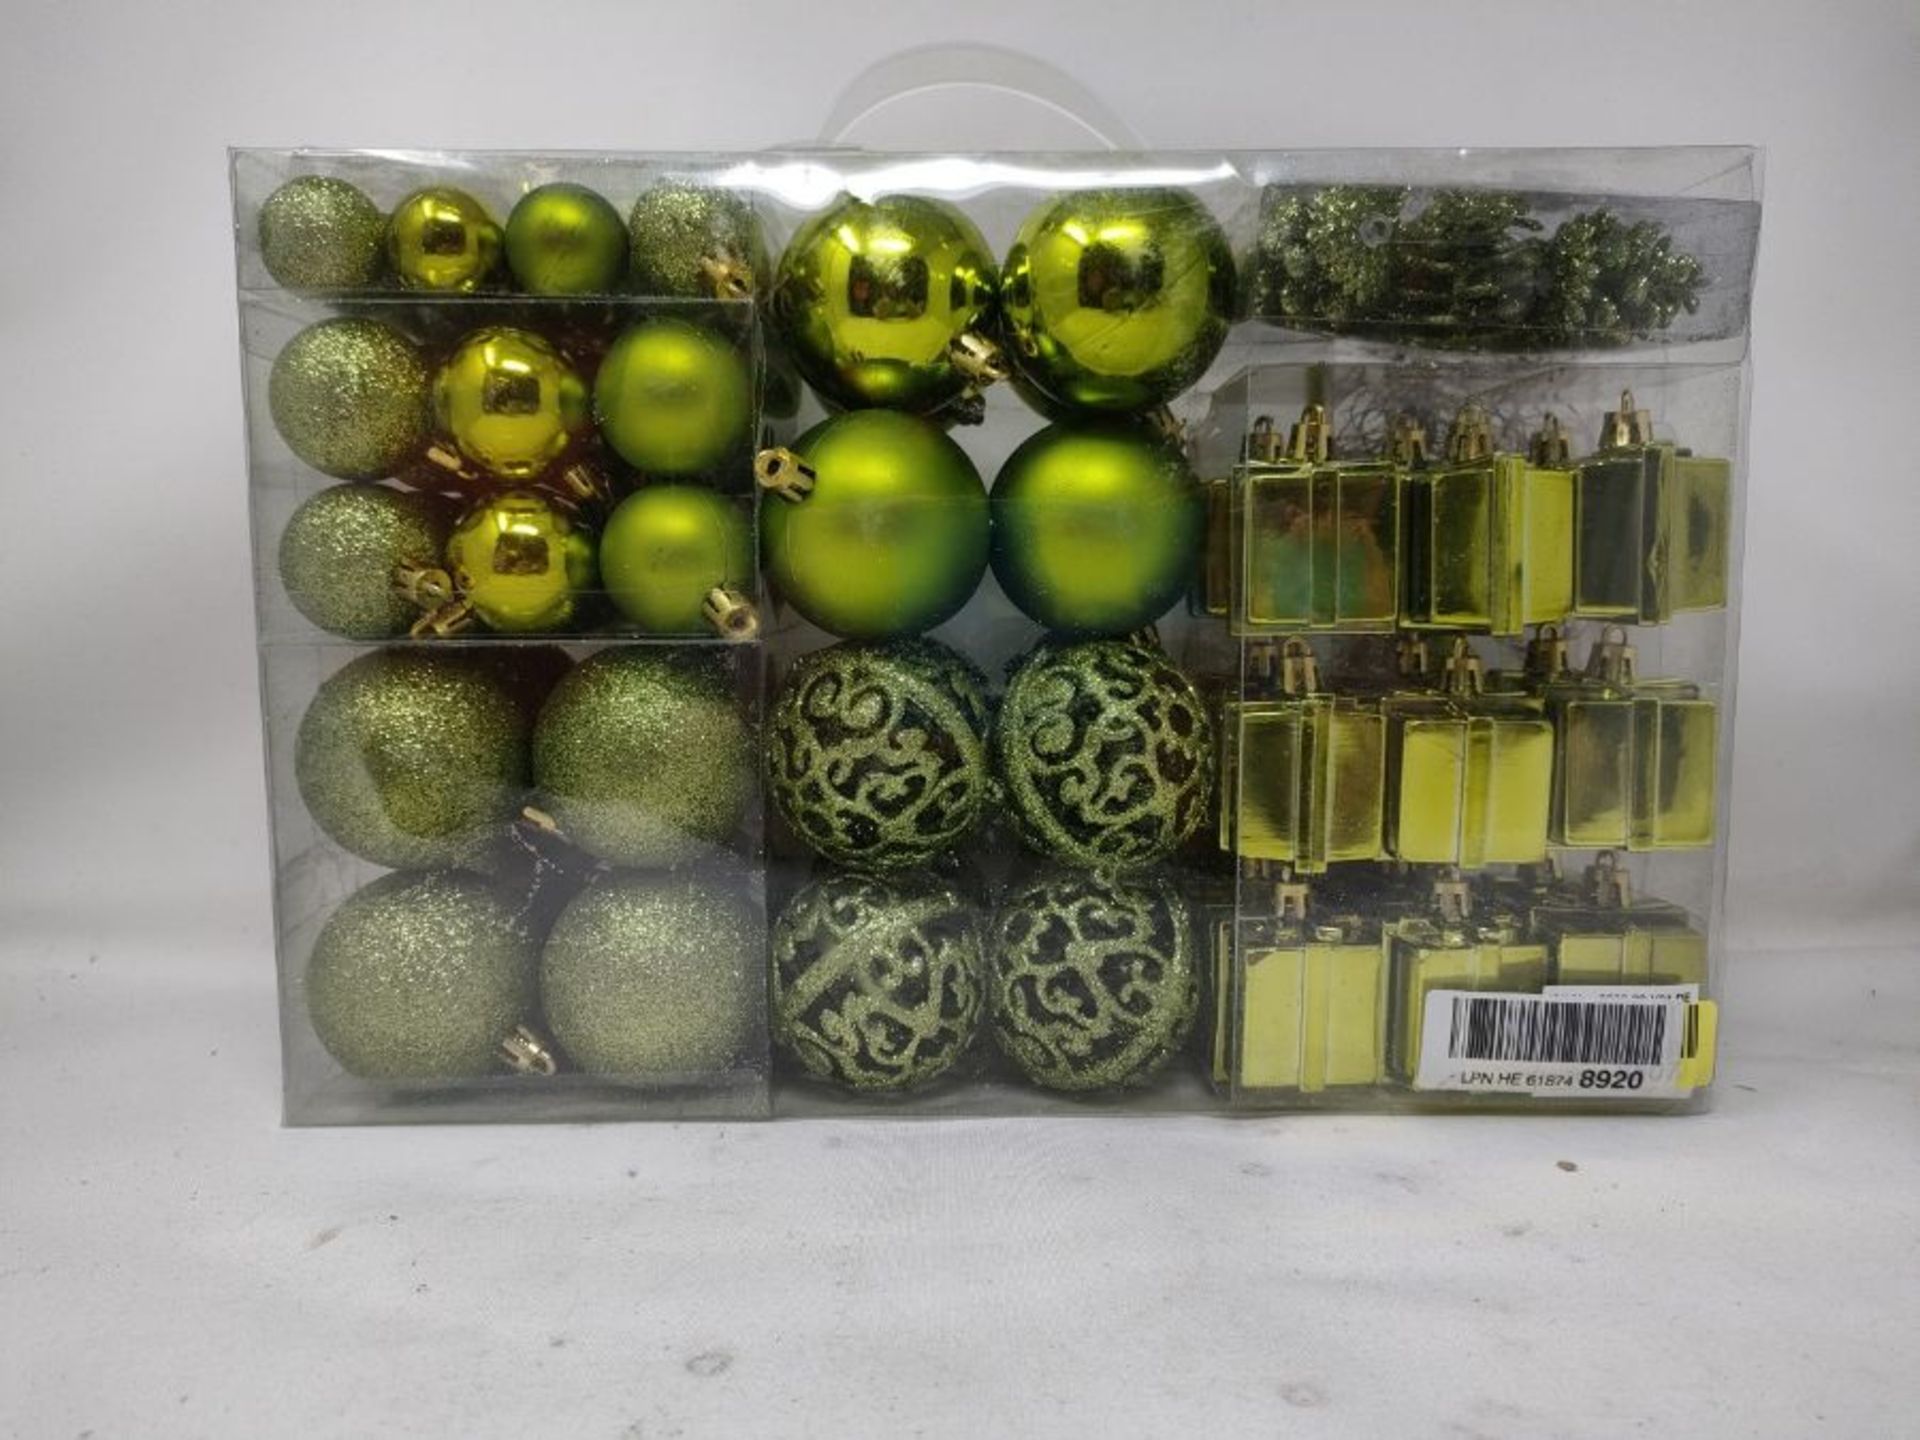 BRUBAKER 101 Pack Assorted Christmas Ball Ornaments - Shatterproof - Baubles with Tree - Image 2 of 2